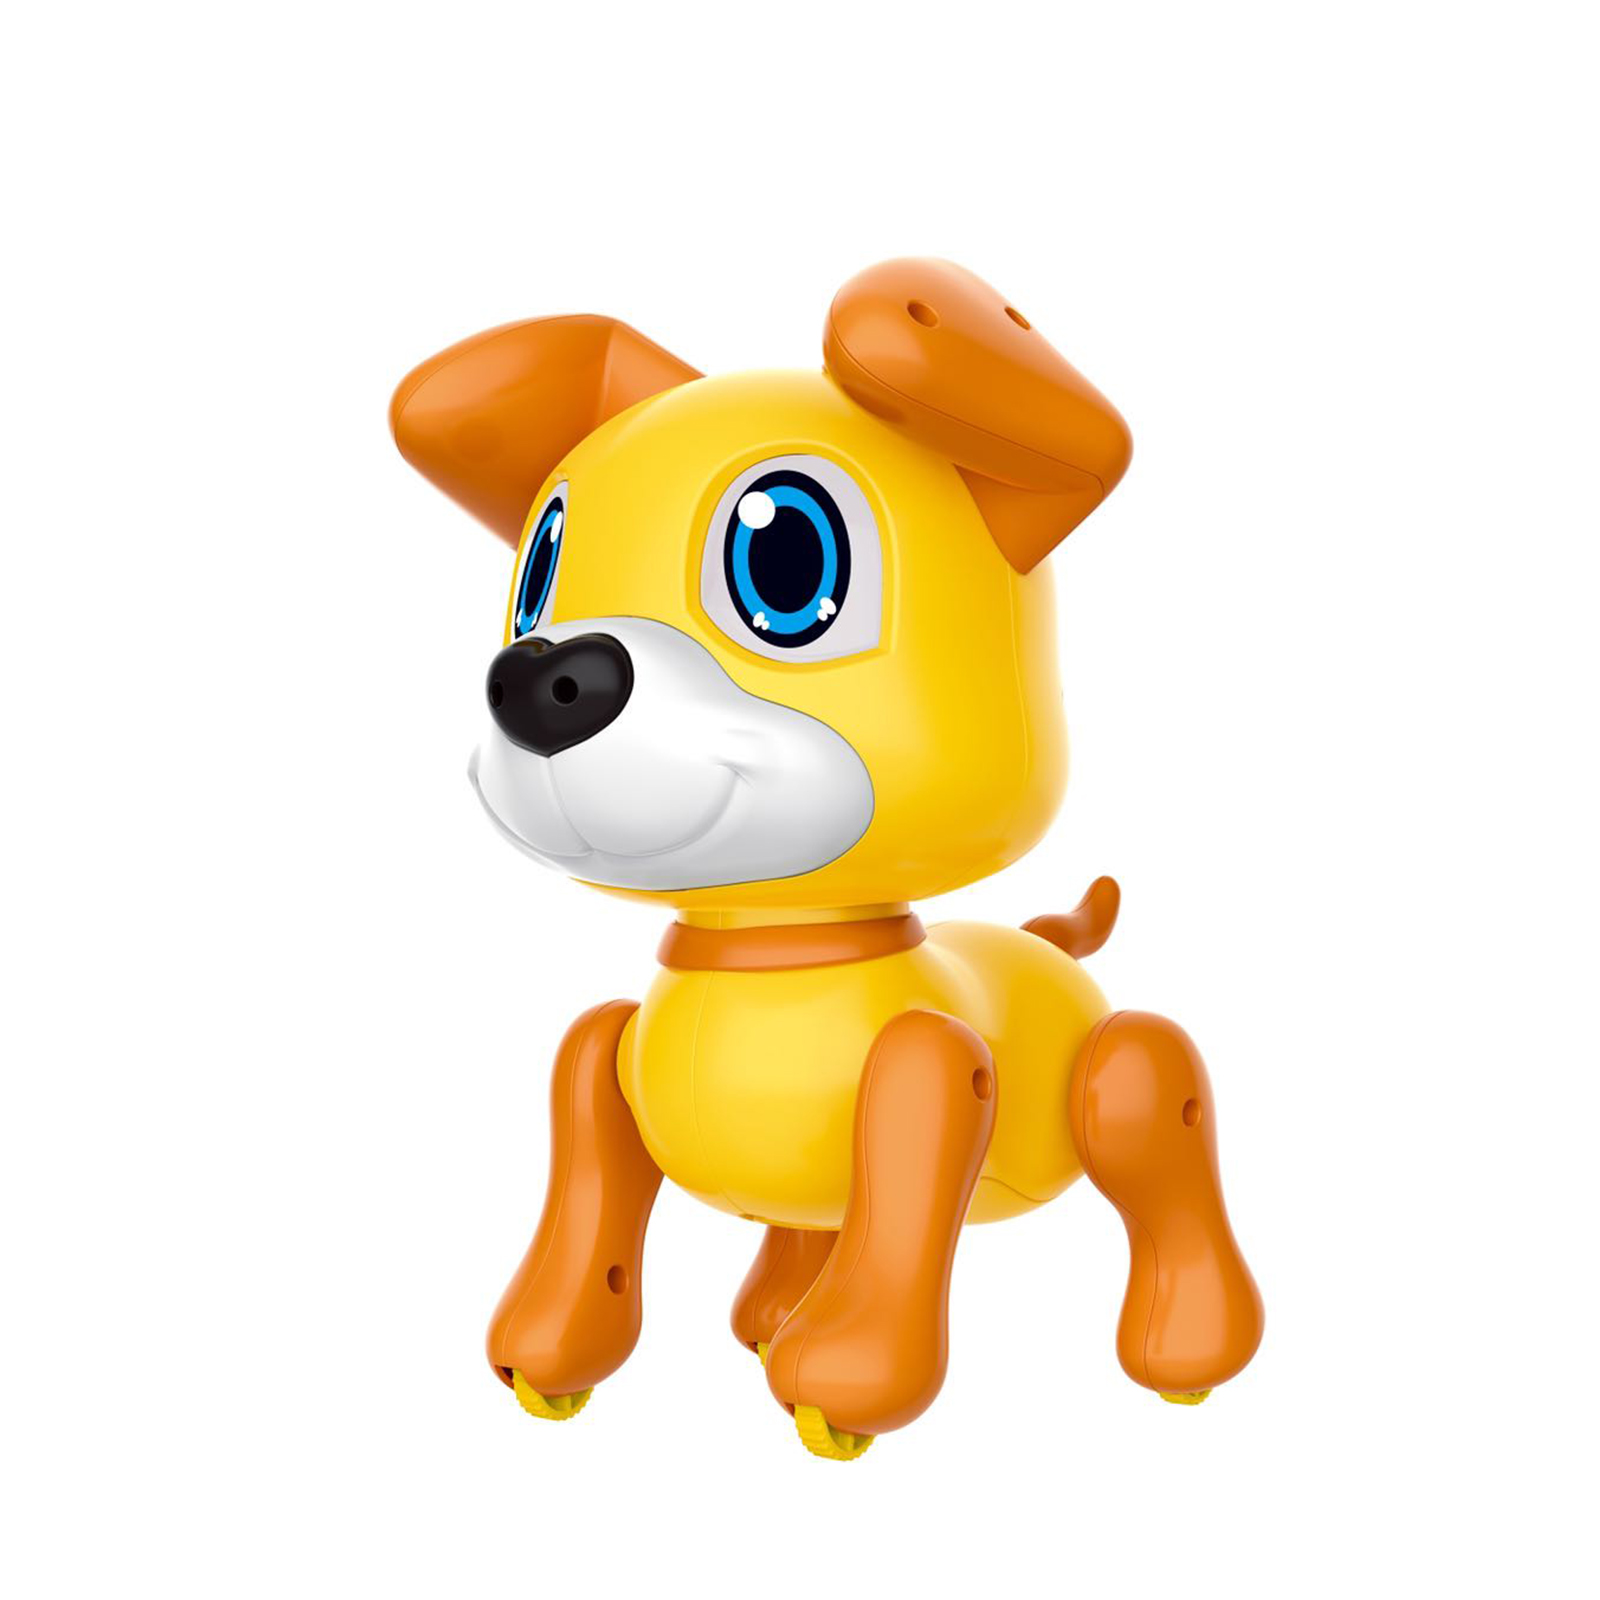 Electronic Robot Dog Toy with Gesture Sensing Lights and Puppy Sounds Intelligent Playiing Music robot toy Gift for Kids Girls